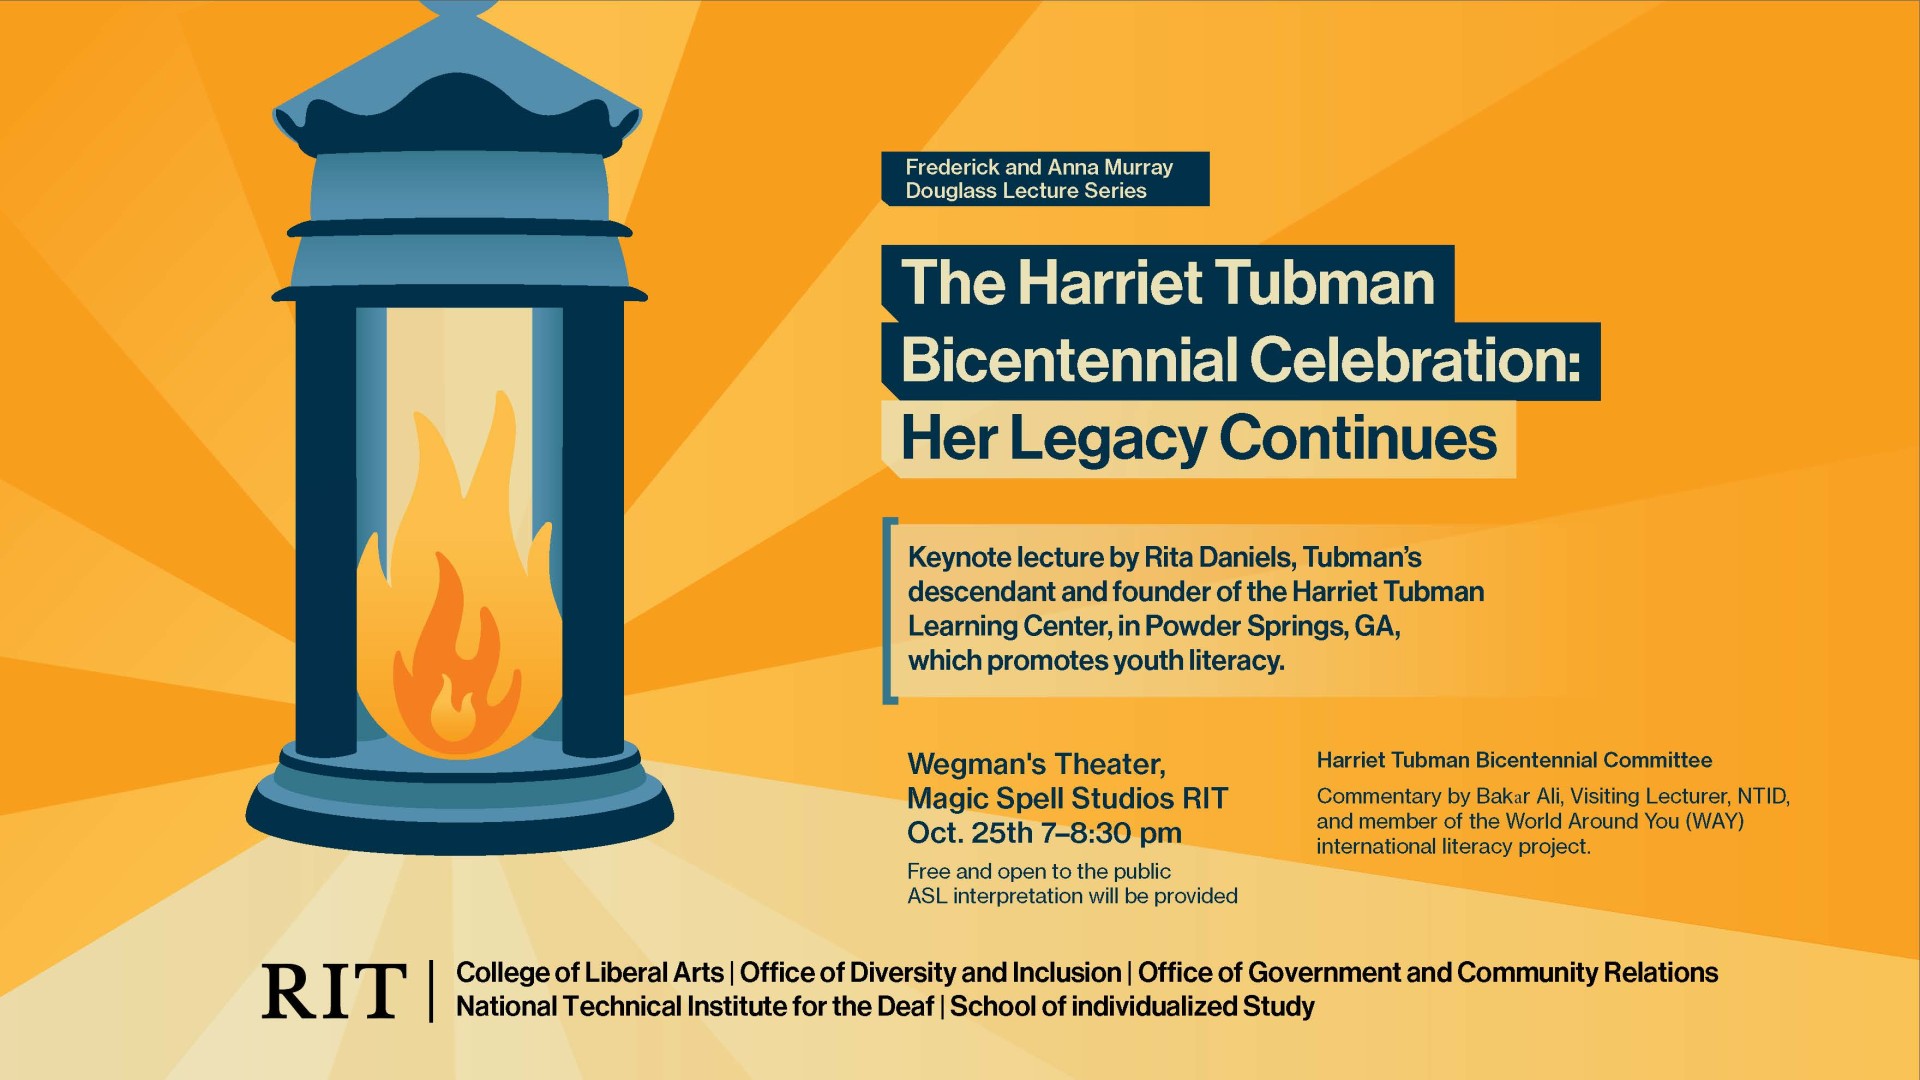 Yellow background with a flame image and text regarding the Harriet Tubman Bicentennial Celebration